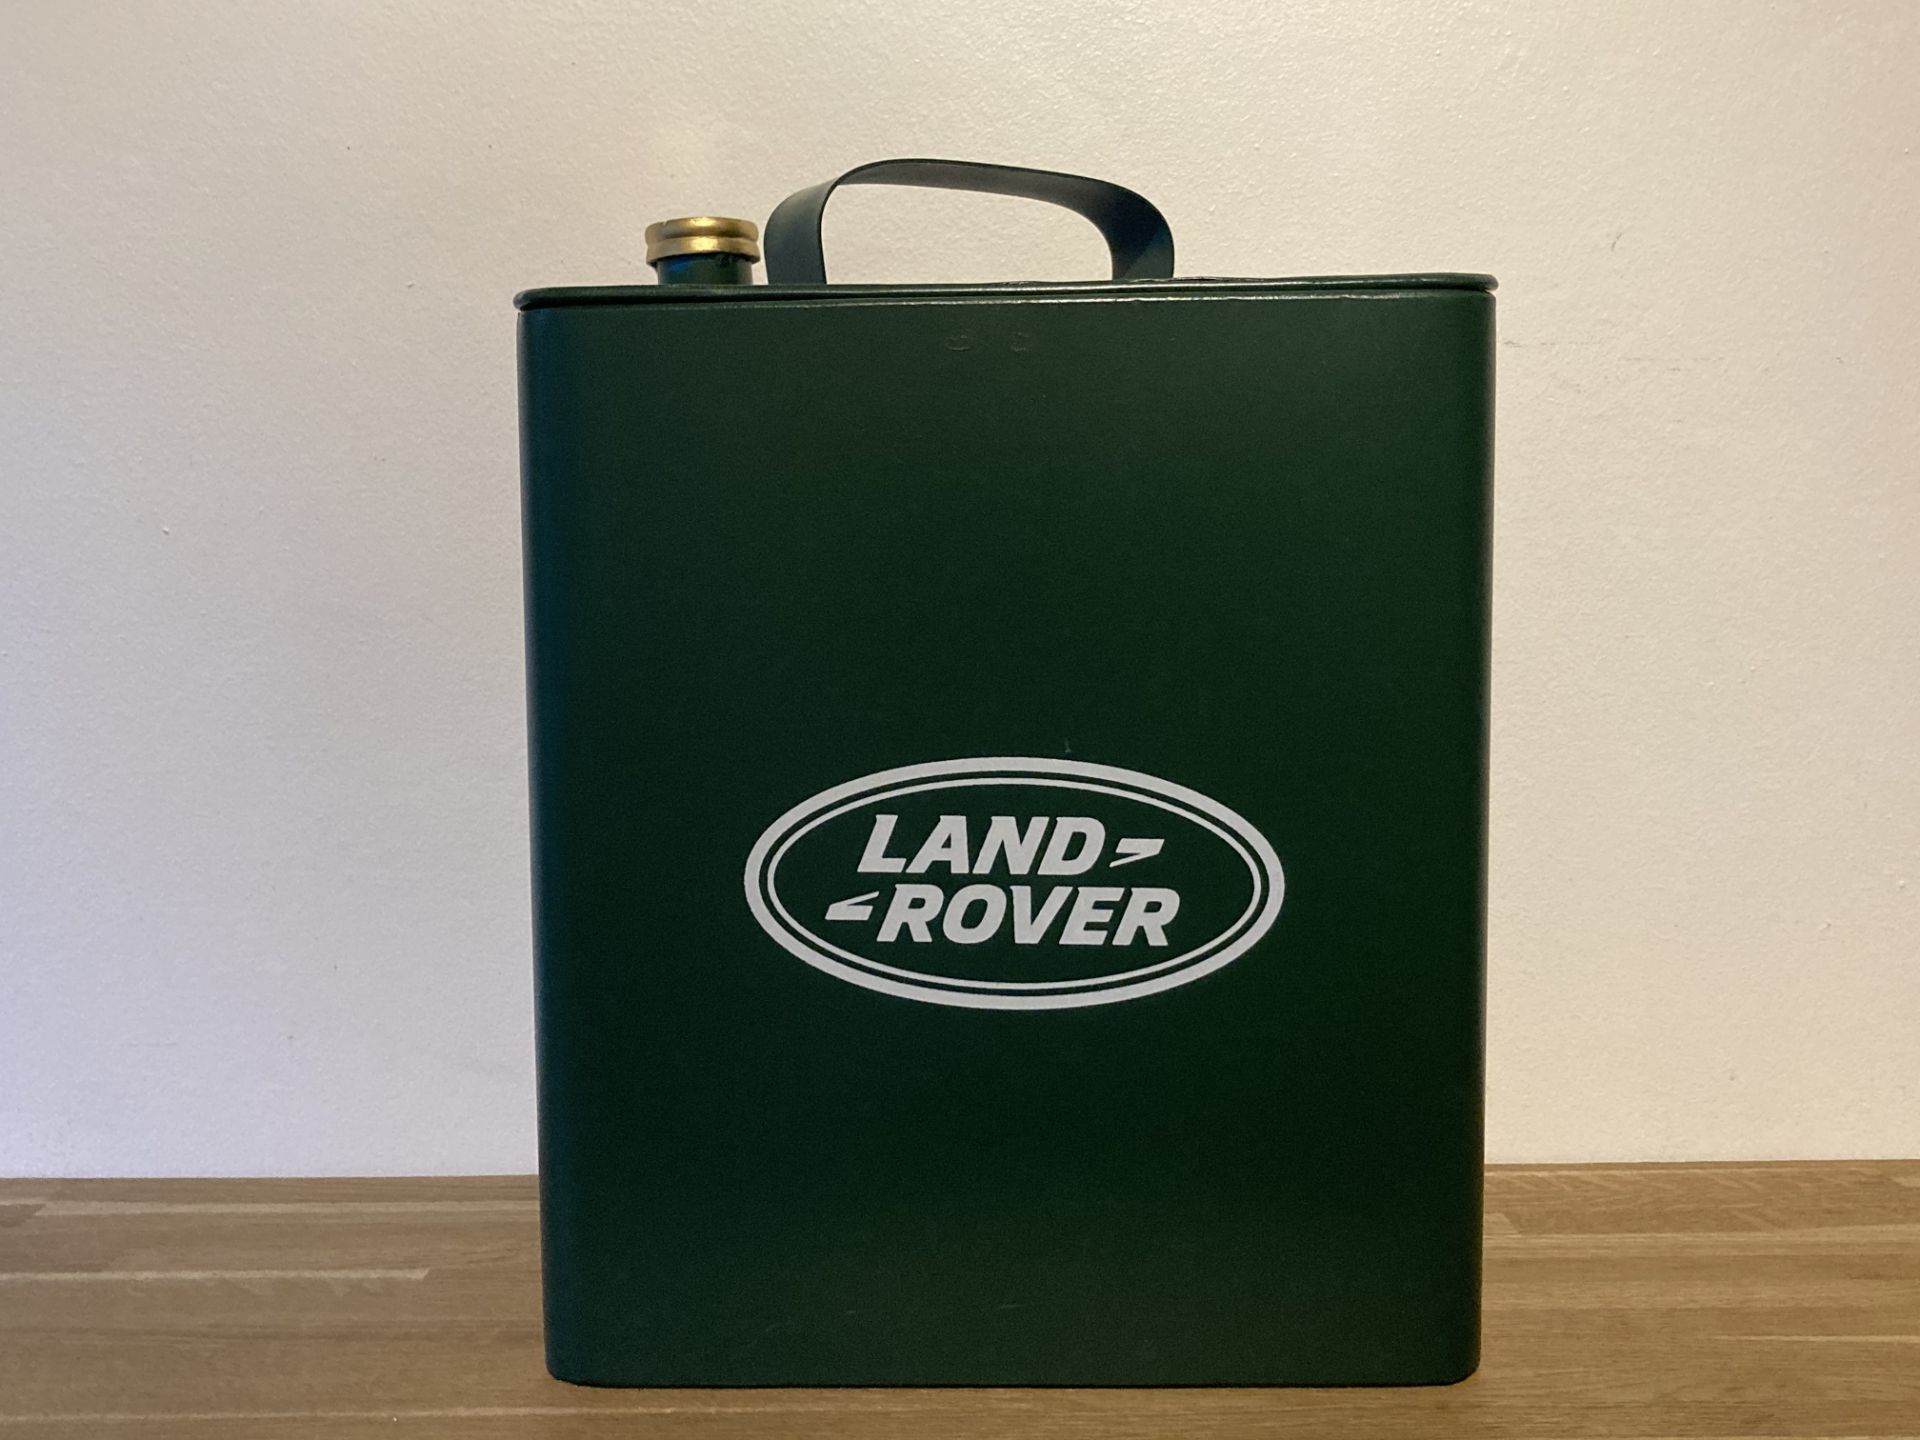 Set Of 3 Land Rover Oil Cans - Image 6 of 14